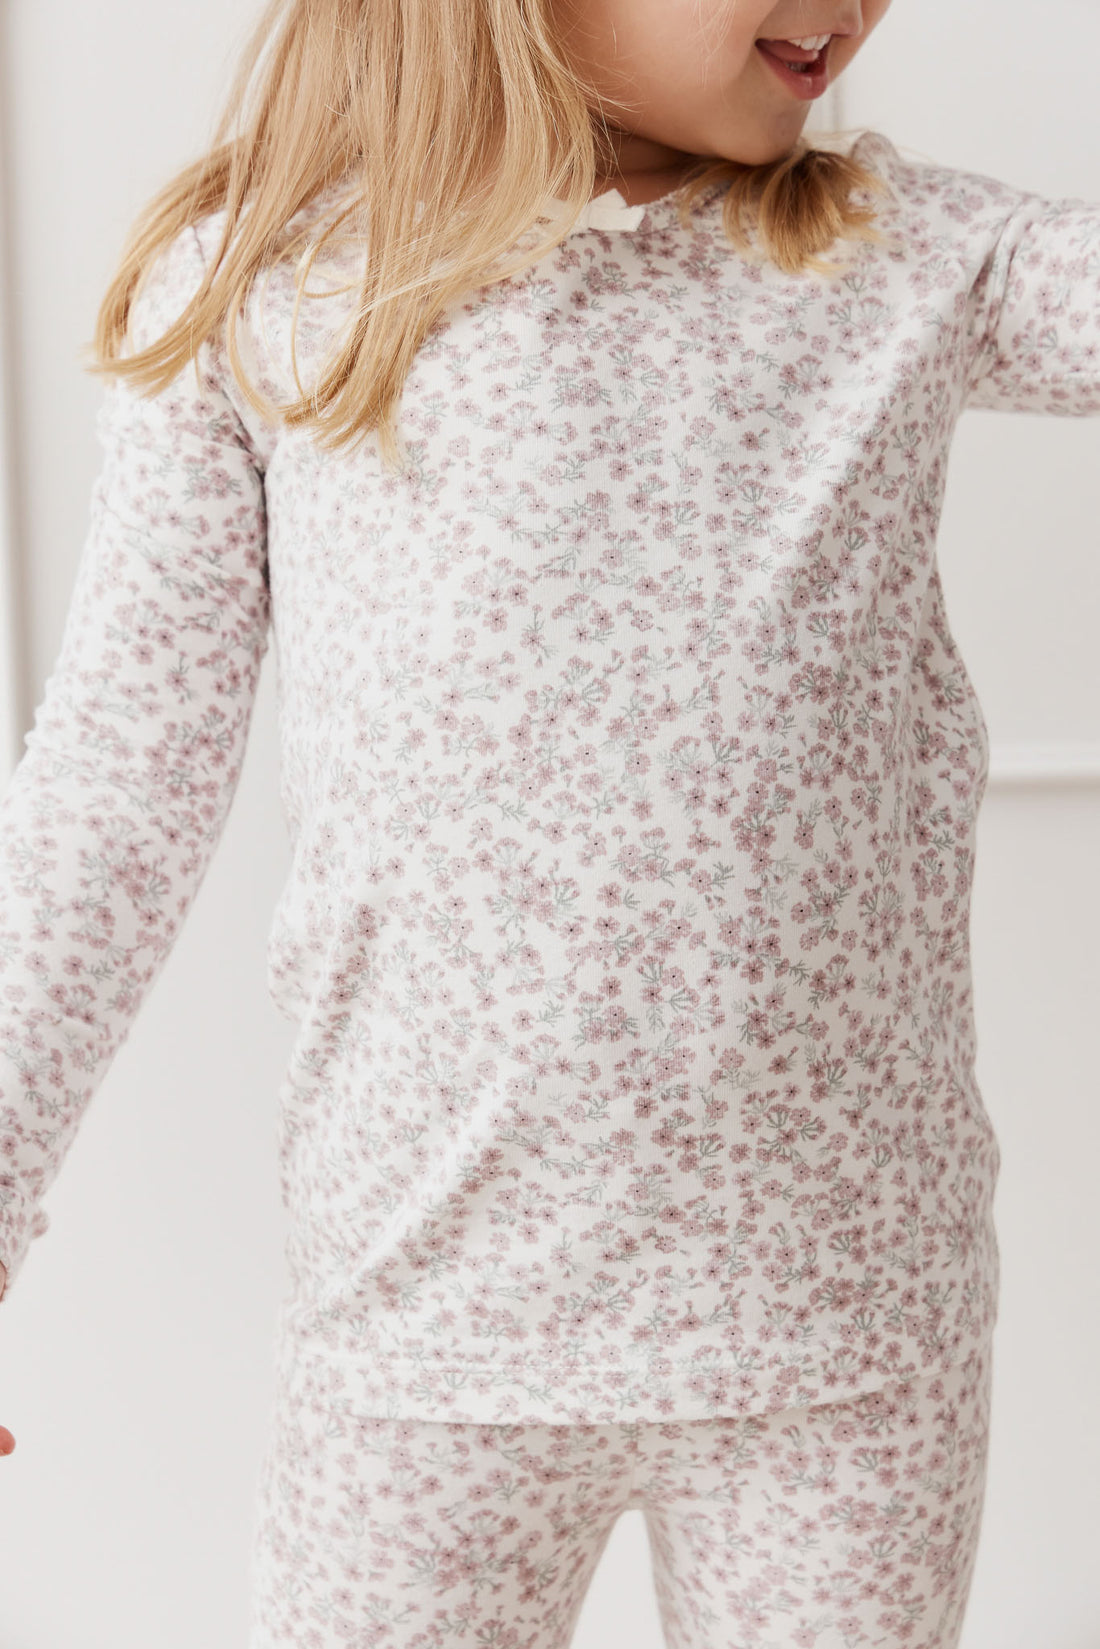 Organic Cotton Long Sleeve Top - Posy Floral Childrens Top from Jamie Kay NZ